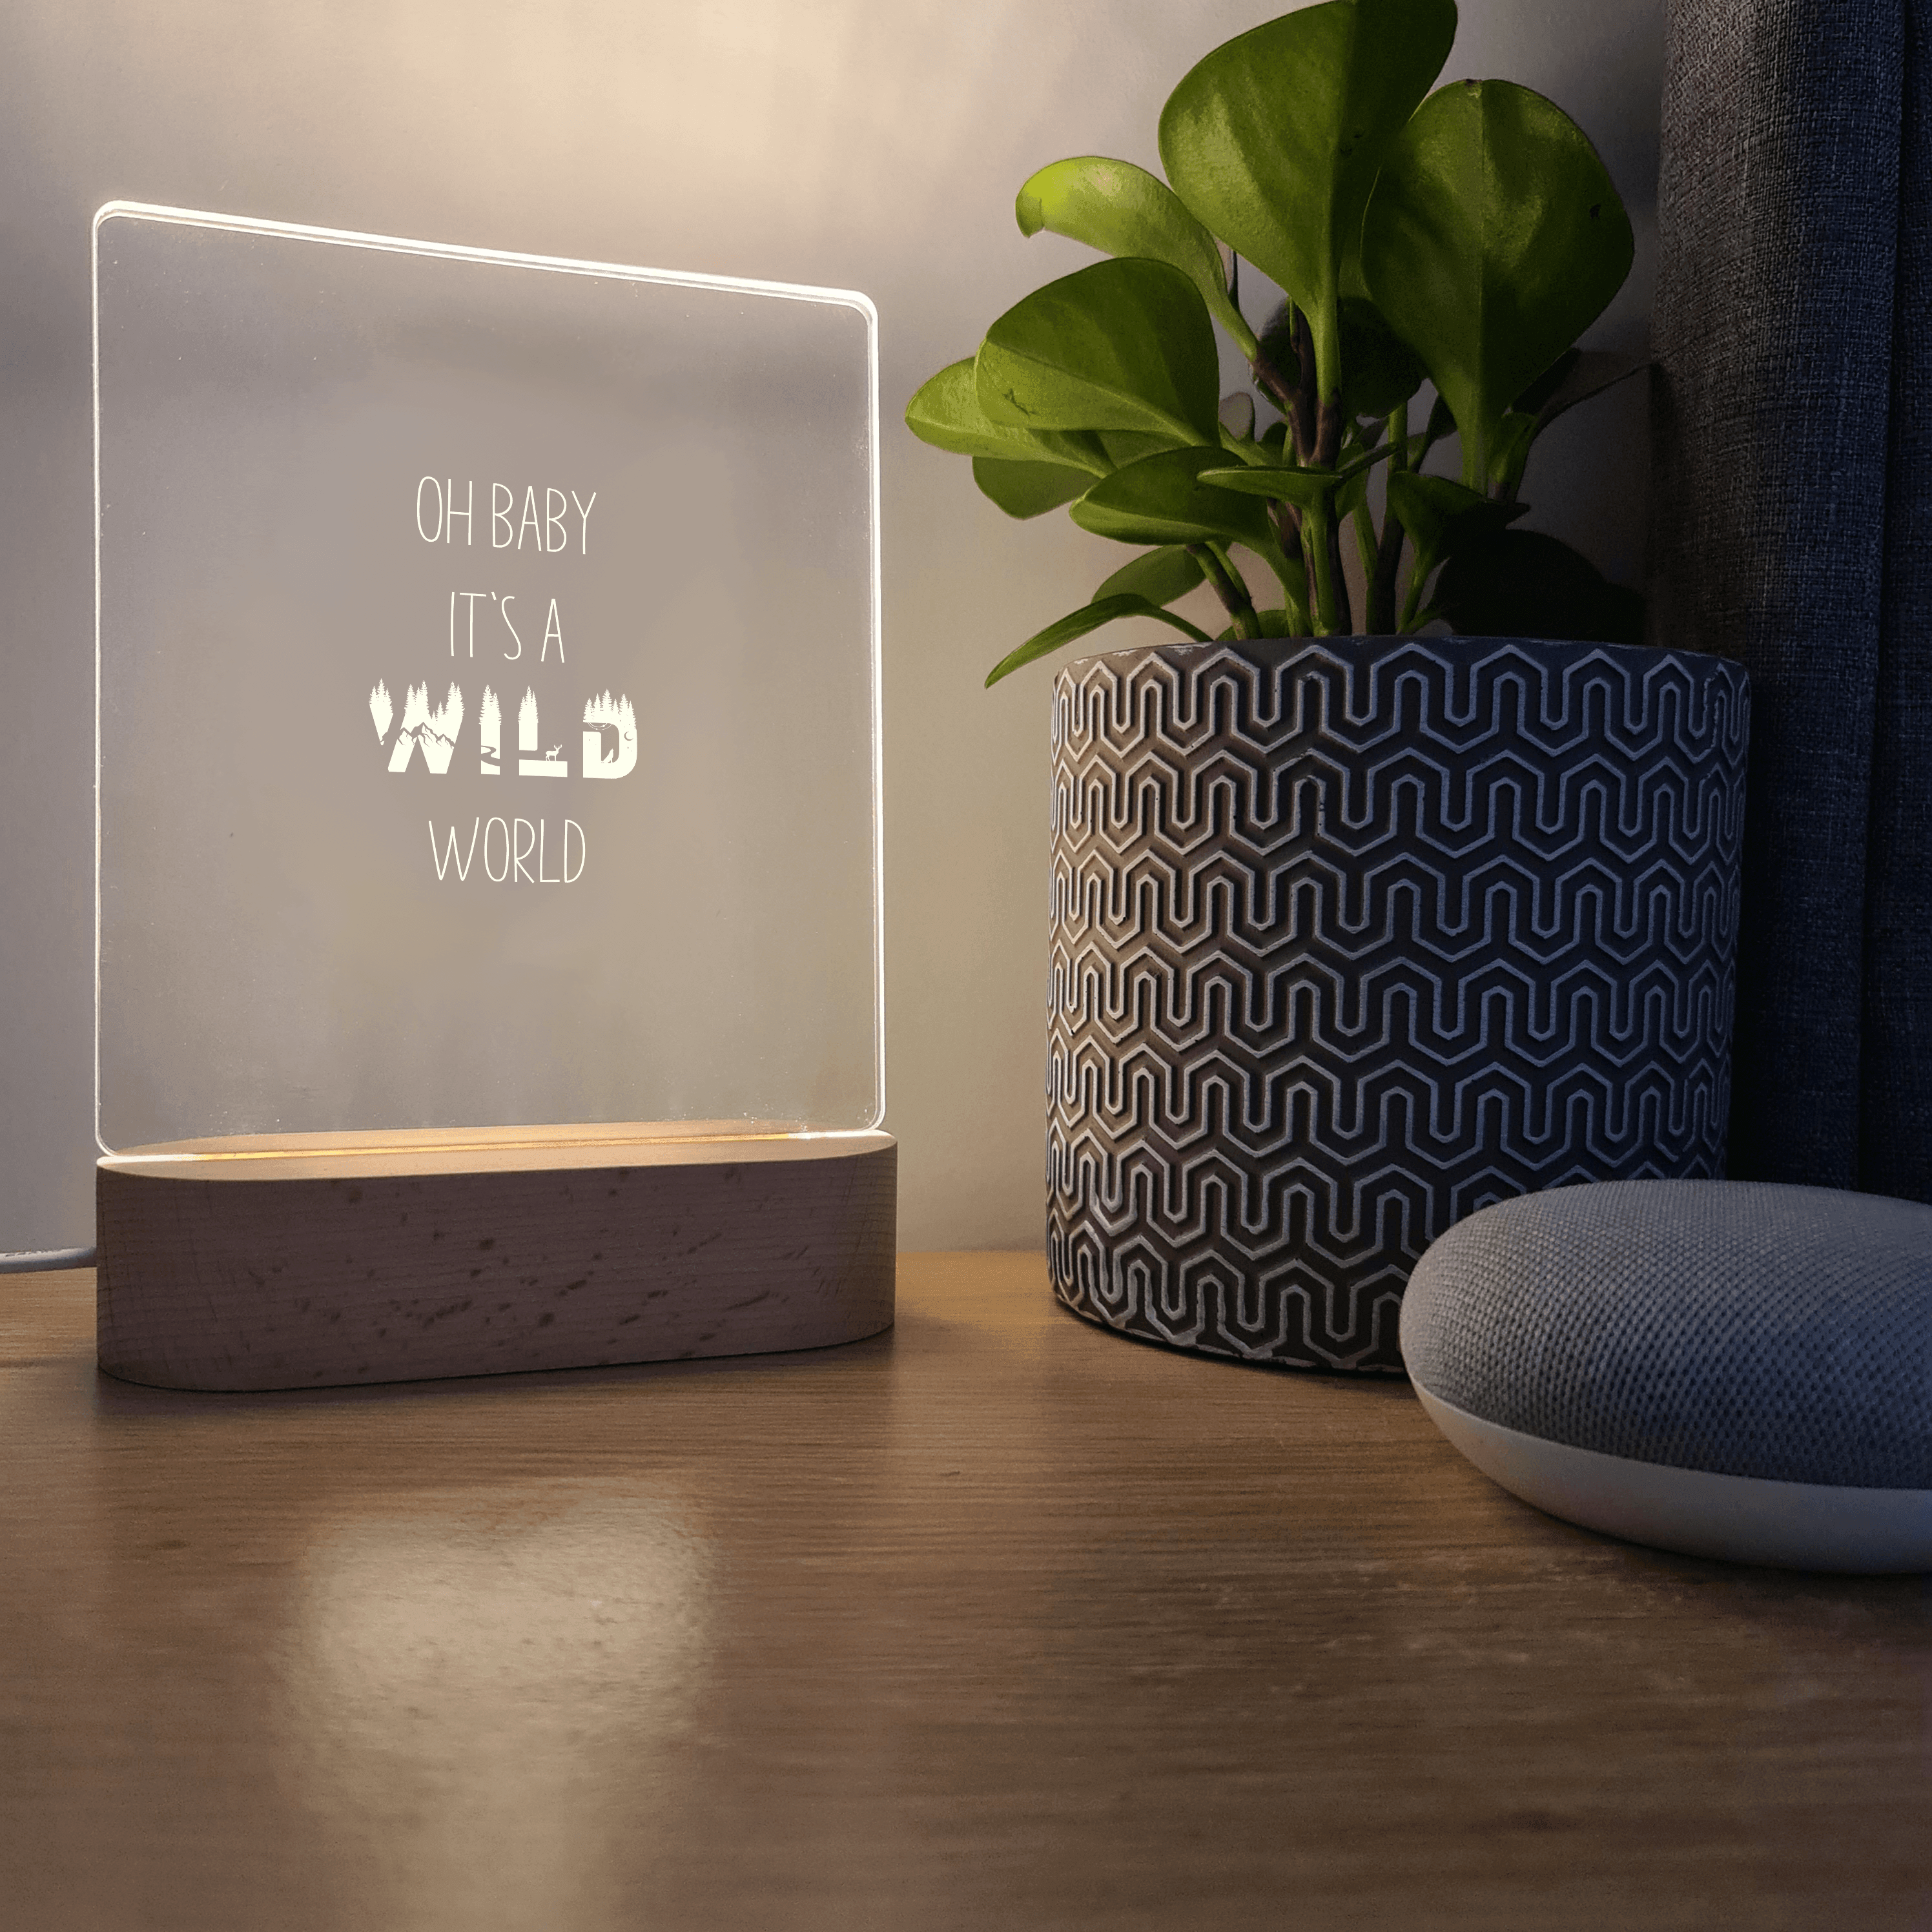 Quote Night Light 🌙 - It's a Wild World (Mountains) - The Willow Corner